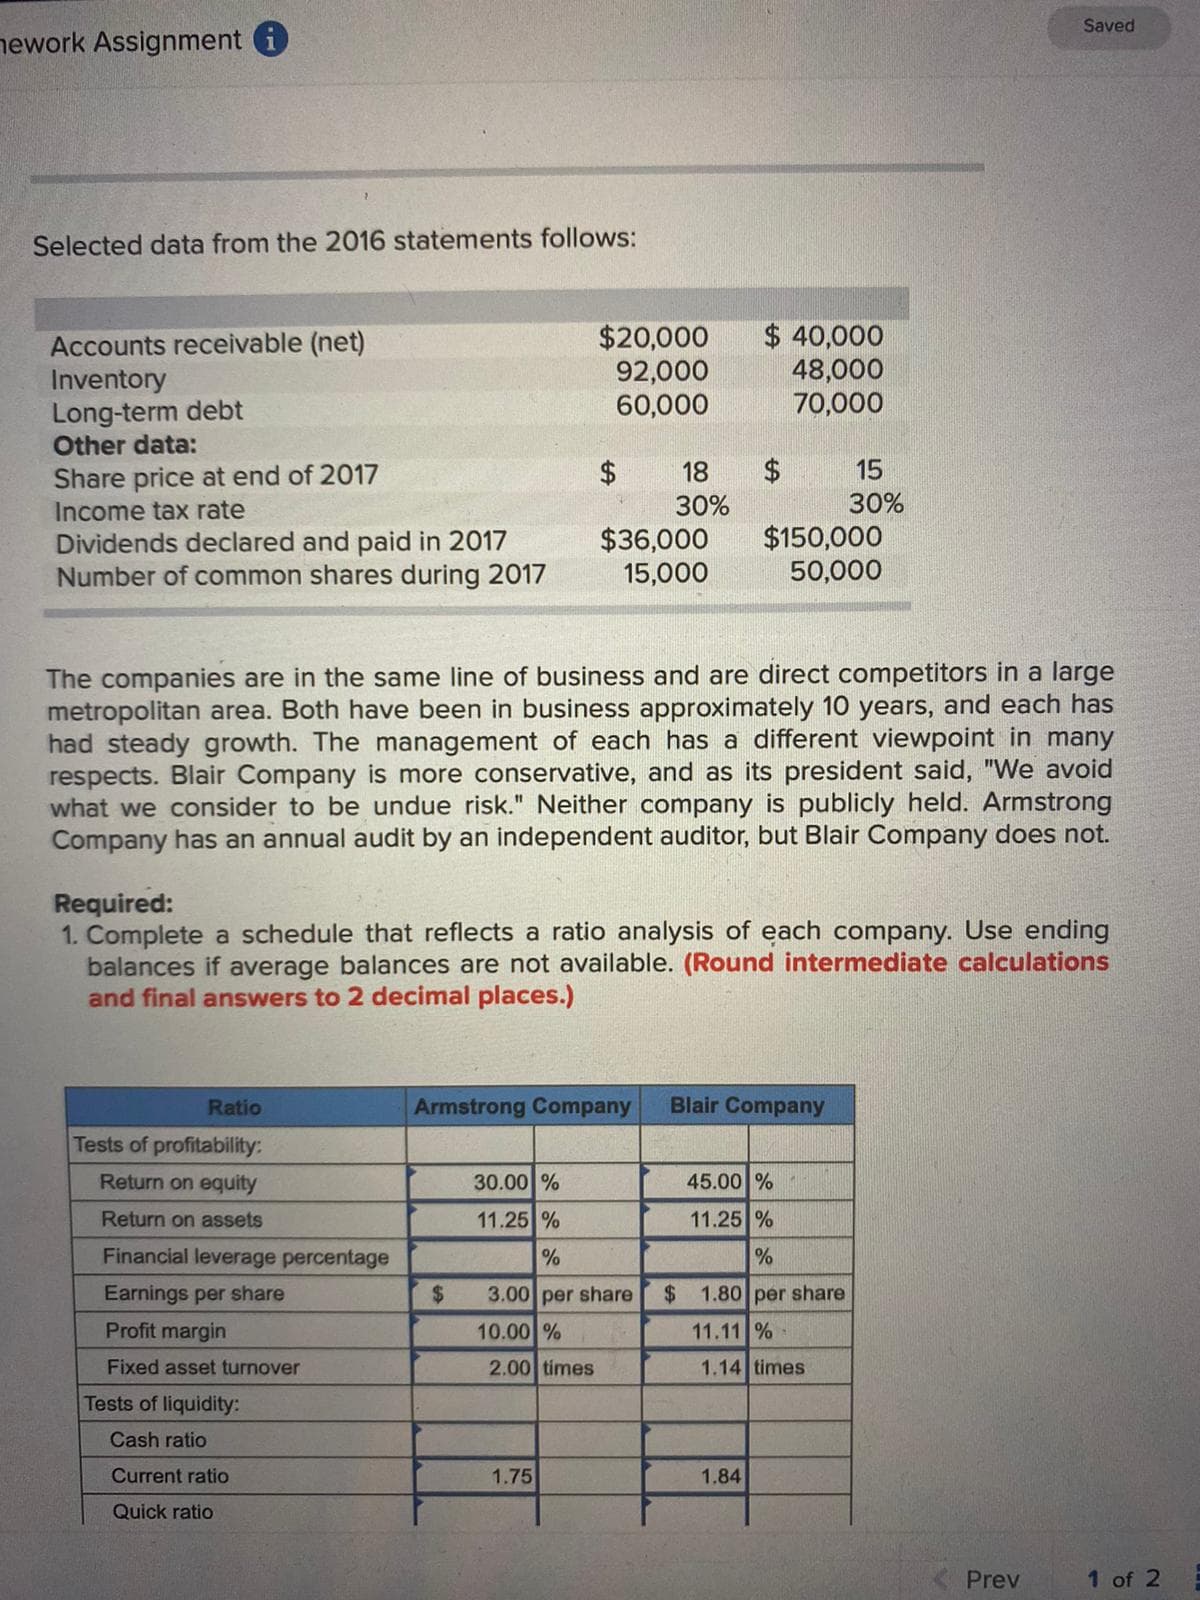 Saved
nework Assignment i
Selected data from the 2016 statements follows:
Accounts receivable (net)
Inventory
Long-term debt
Other data:
$20,000
92,000
60,000
$ 40,000
48,000
70,000
Share price at end of 2017
$ 18
$ 15
Income tax rate
30%
30%
Dividends declared and paid in 2017
Number of common shares during 2017
$36,000
15,000
$150,000
50,000
The companies are in the same line of business and are direct competitors in a large
metropolitan area. Both have been in business approximately 10 years, and each has
had steady growth. The management of each has a different viewpoint in many
respects. Blair Company is more conservative, and as its president said, "We avoid
what we consider to be undue risk." Neither company is publicly held. Armstrong
Company has an annual audit by an independent auditor, but Blair Company does not.
Required:
1. Complete a schedule that reflects a ratio analysis of each company. Use ending
balances if average balances are not available. (Round intermediate calculations
and final answers to 2 decimal places.)
Ratio
Armstrong Company
Blair Company
Tests of profitability:
Return on equity
30.00 %
45.00 %
Return on assets
11.25 %
11.25 %
Financial leverage percentage
Earnings per share
24
3.00 per share
$ 1.80 per share
Profit margin
10.00 %
11.11 % -
Fixed asset turnover
2.00 times
1.14 times
Tests of liquidity:
Cash ratio
Current ratio
1.75
1.84
Quick ratio
Prev
1 of 2
